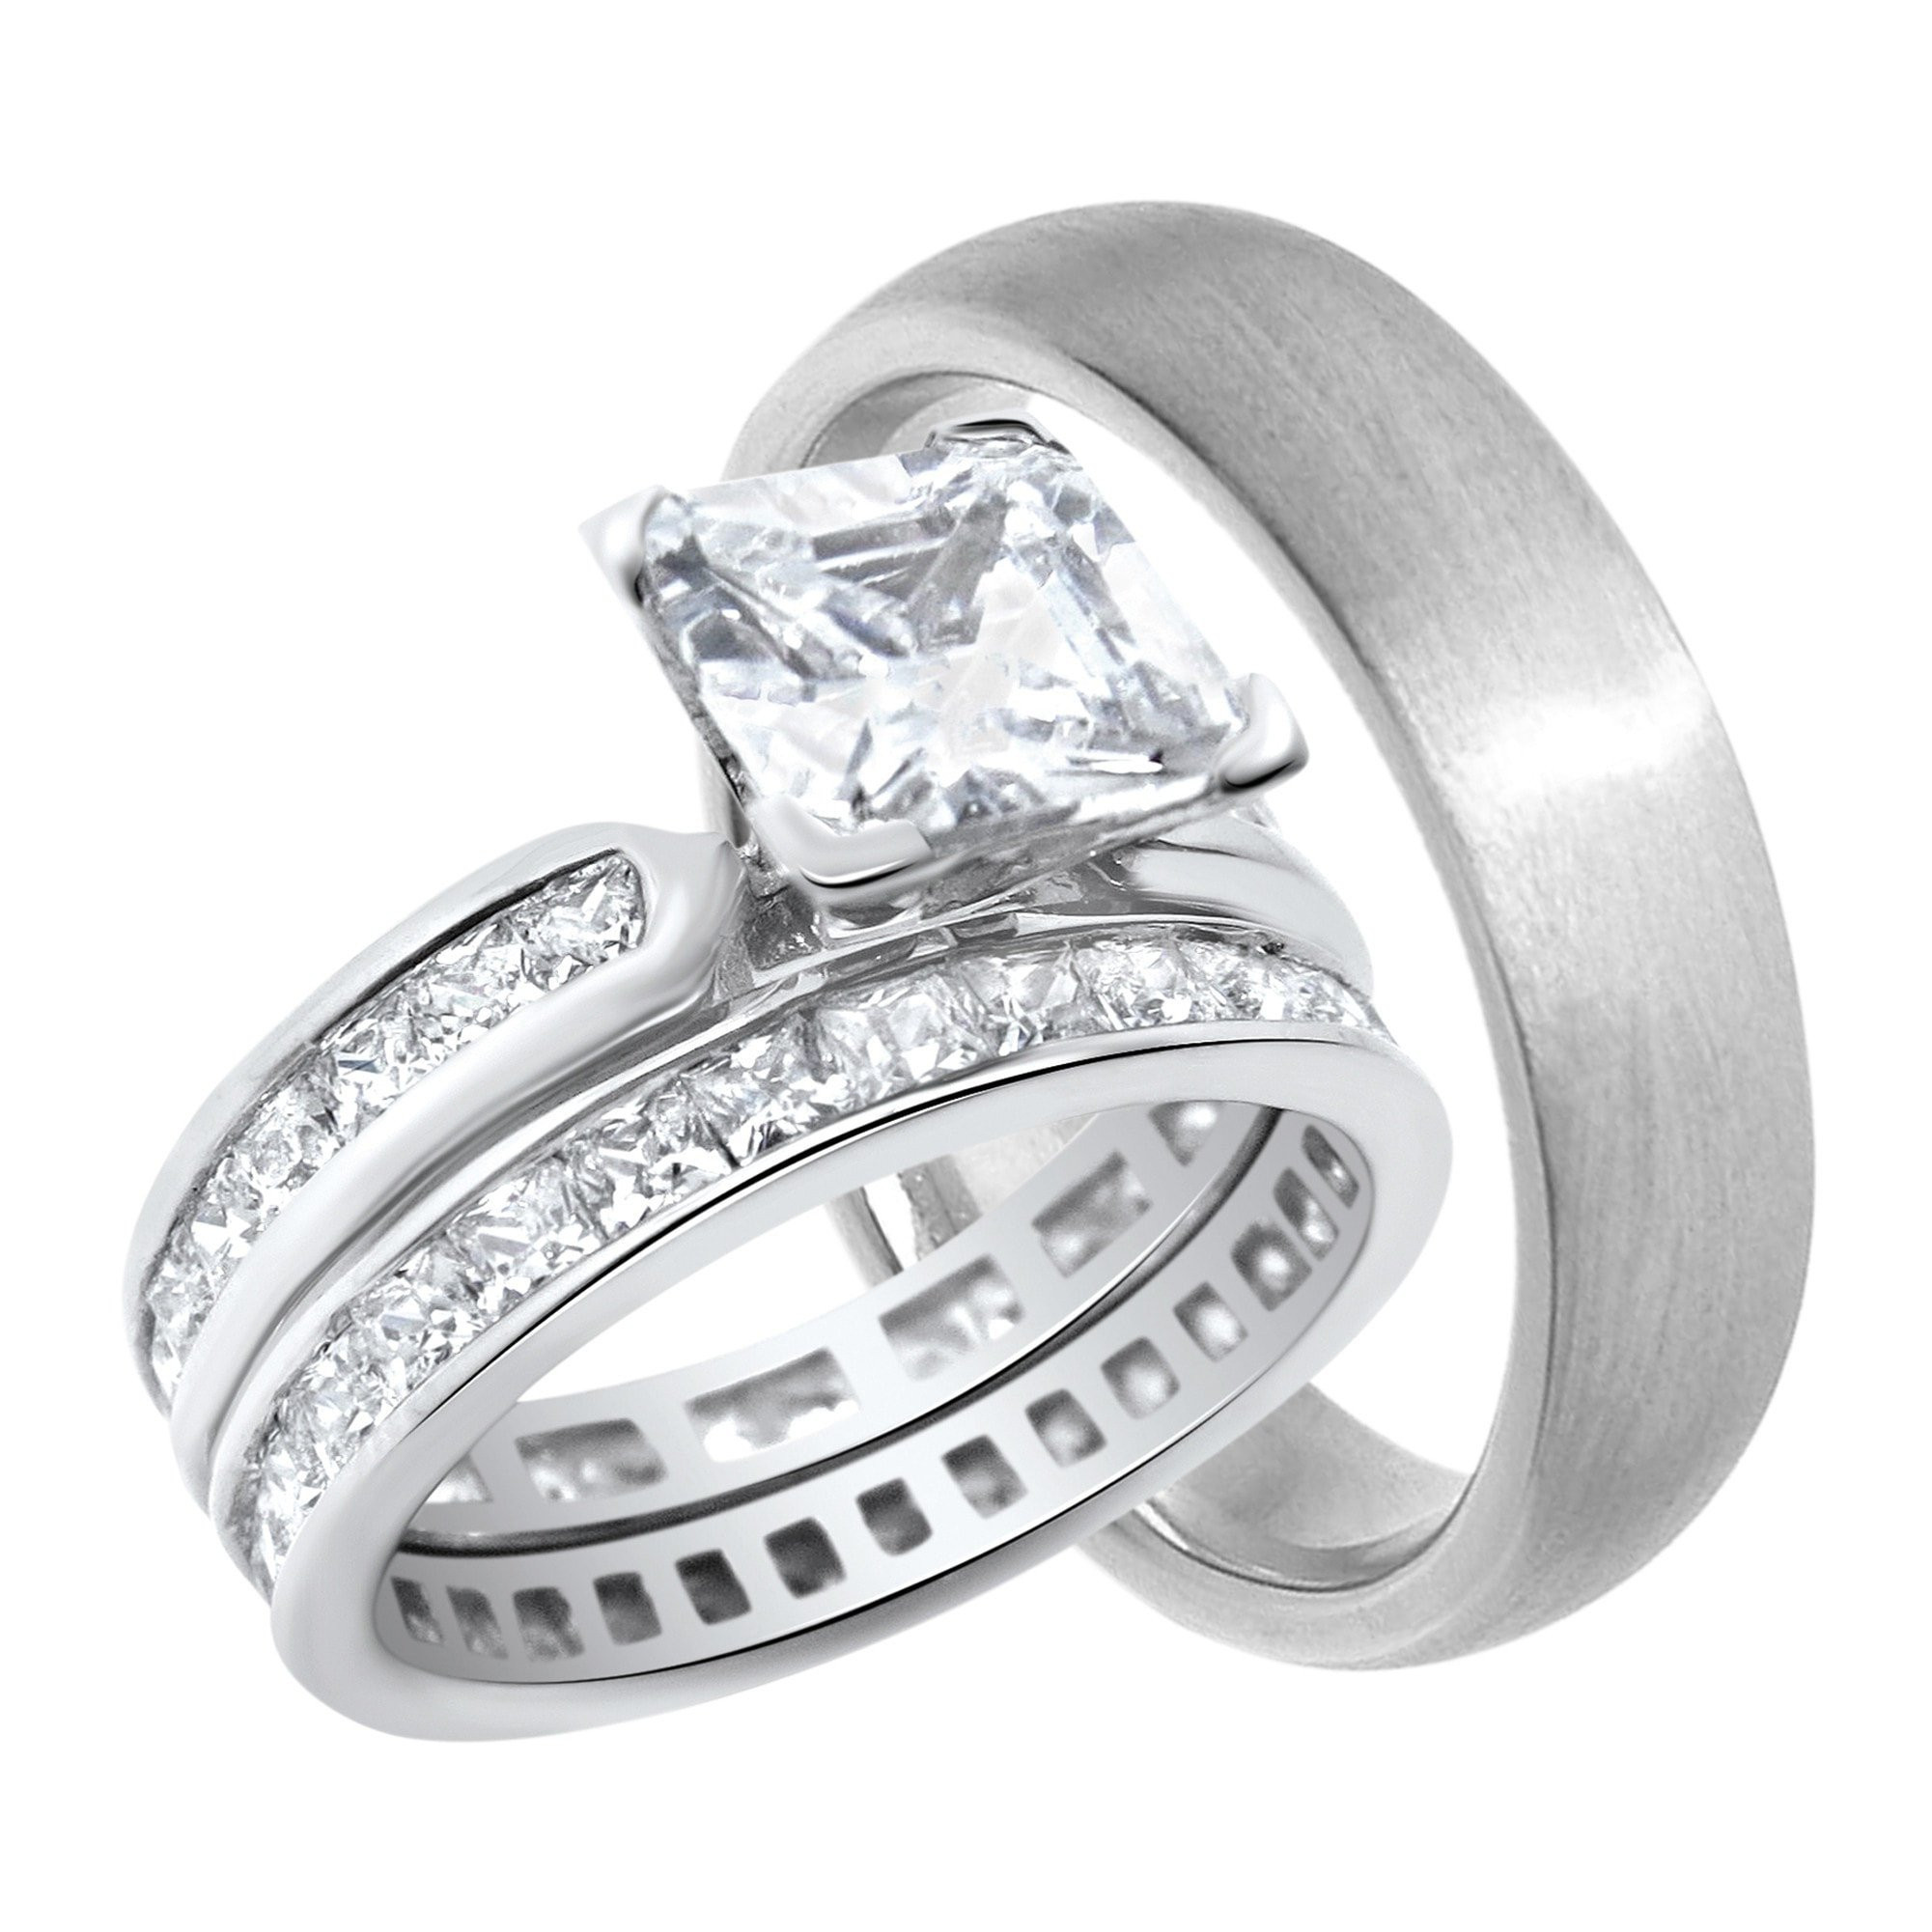 Cheap Wedding Ring Sets His And Hers
 His Hers Wedding Rings Set Cheap Matching Rings for Him